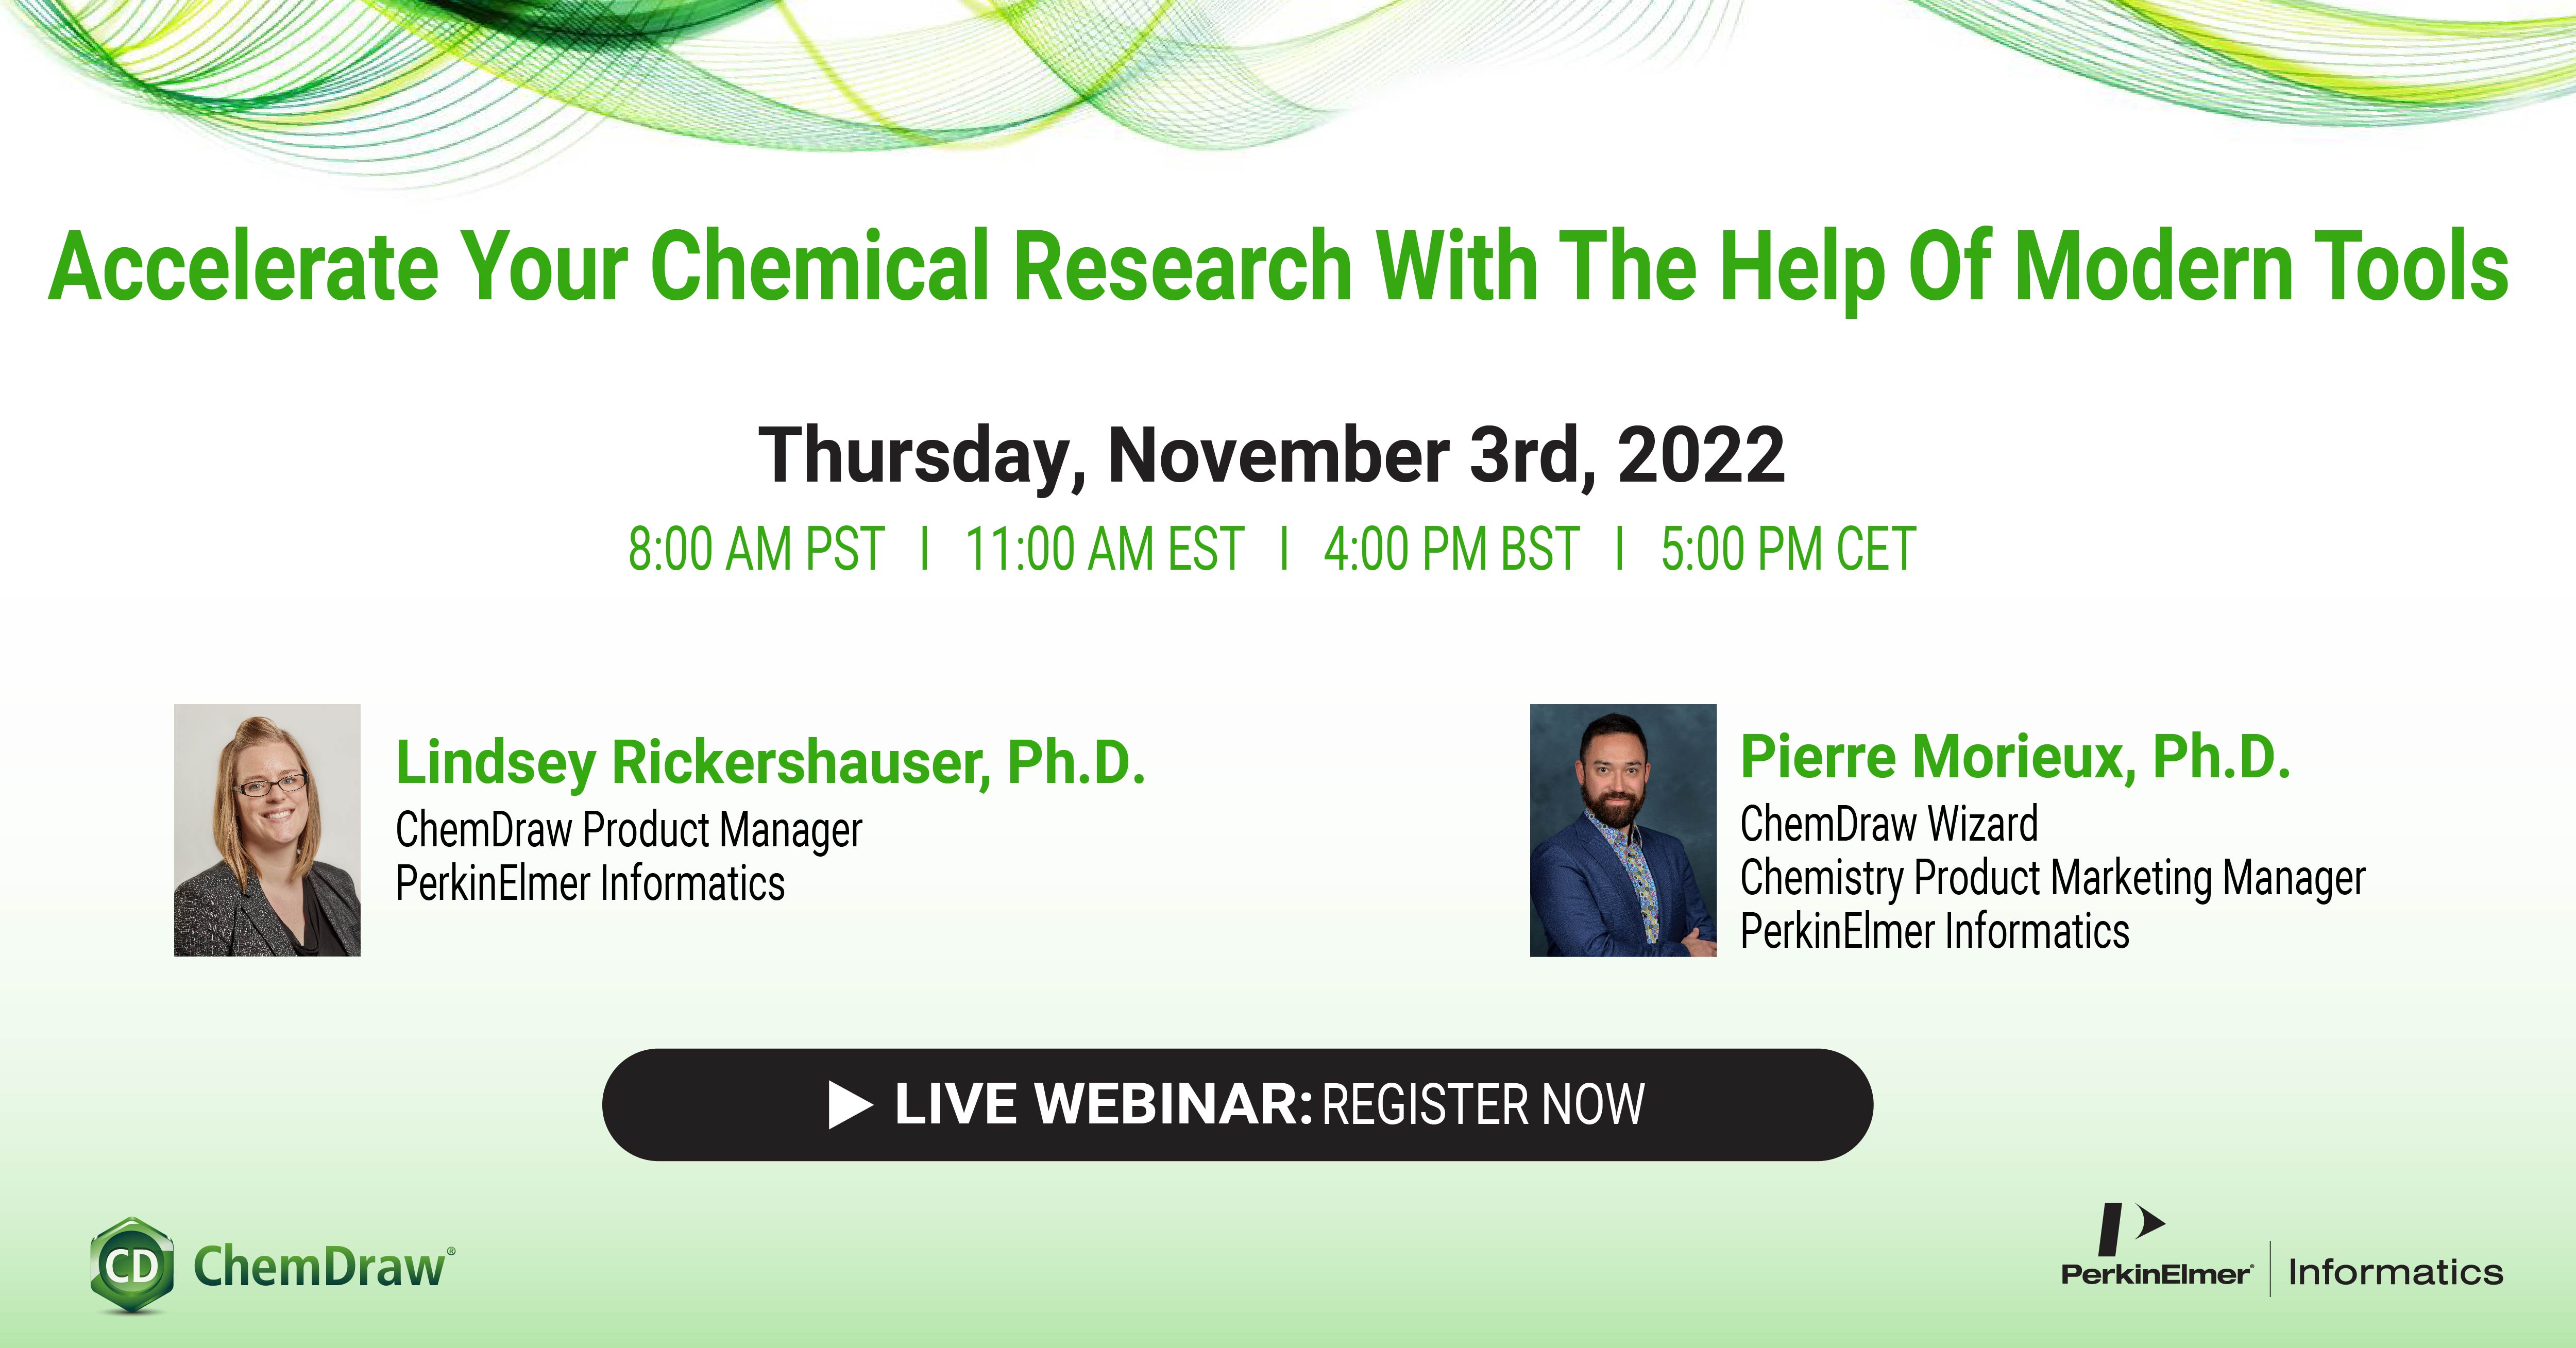 Webinar: Nov 3. Accelerate your Chemical Research with the Help of Modern Tools